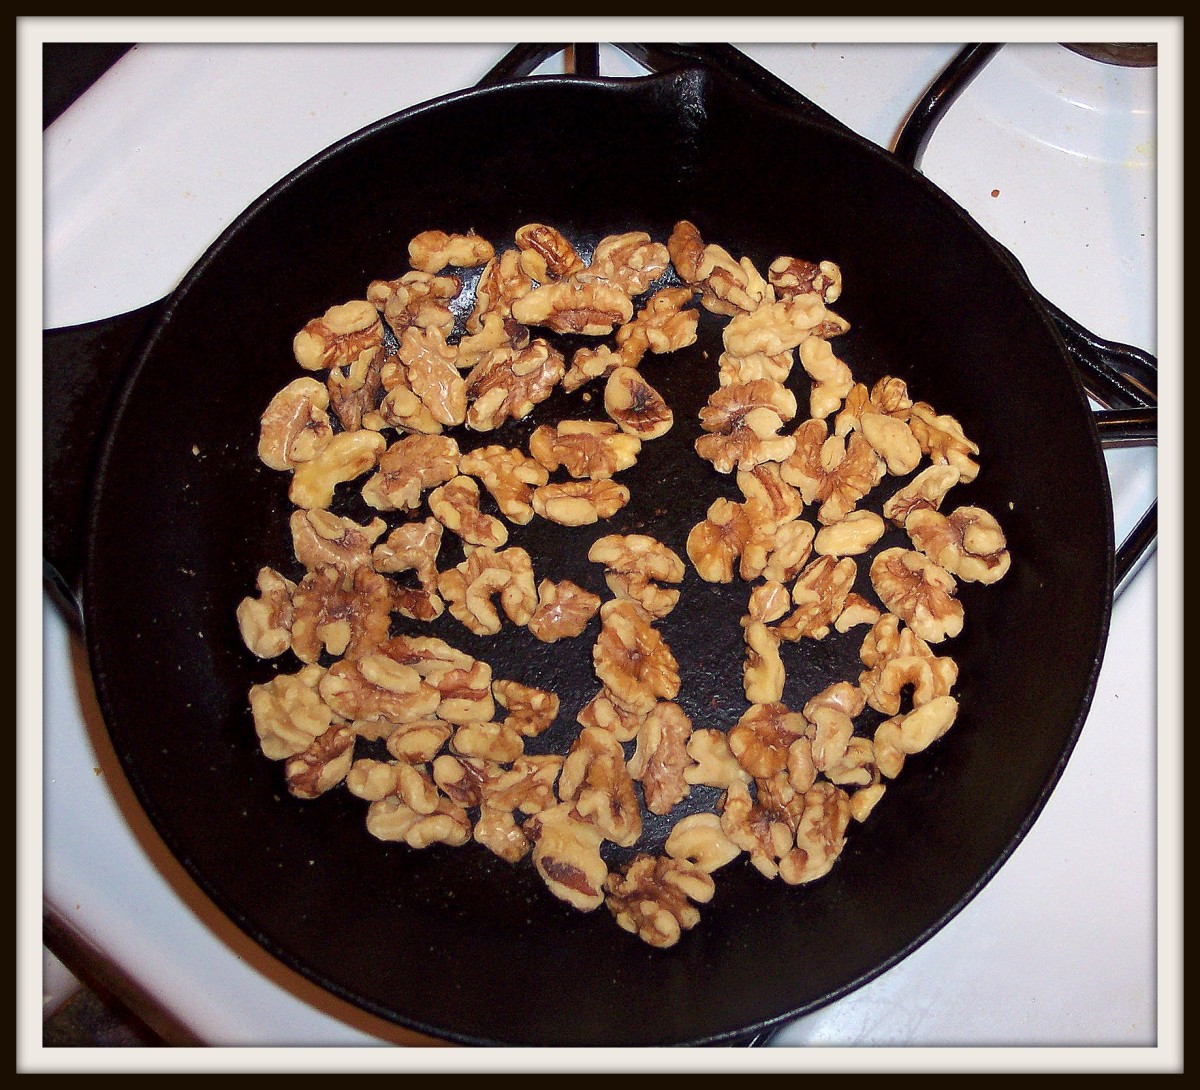 If you wish, you can toast the nuts for a few minutes in a frying pan before coating them. It renders a slightly different flavor.